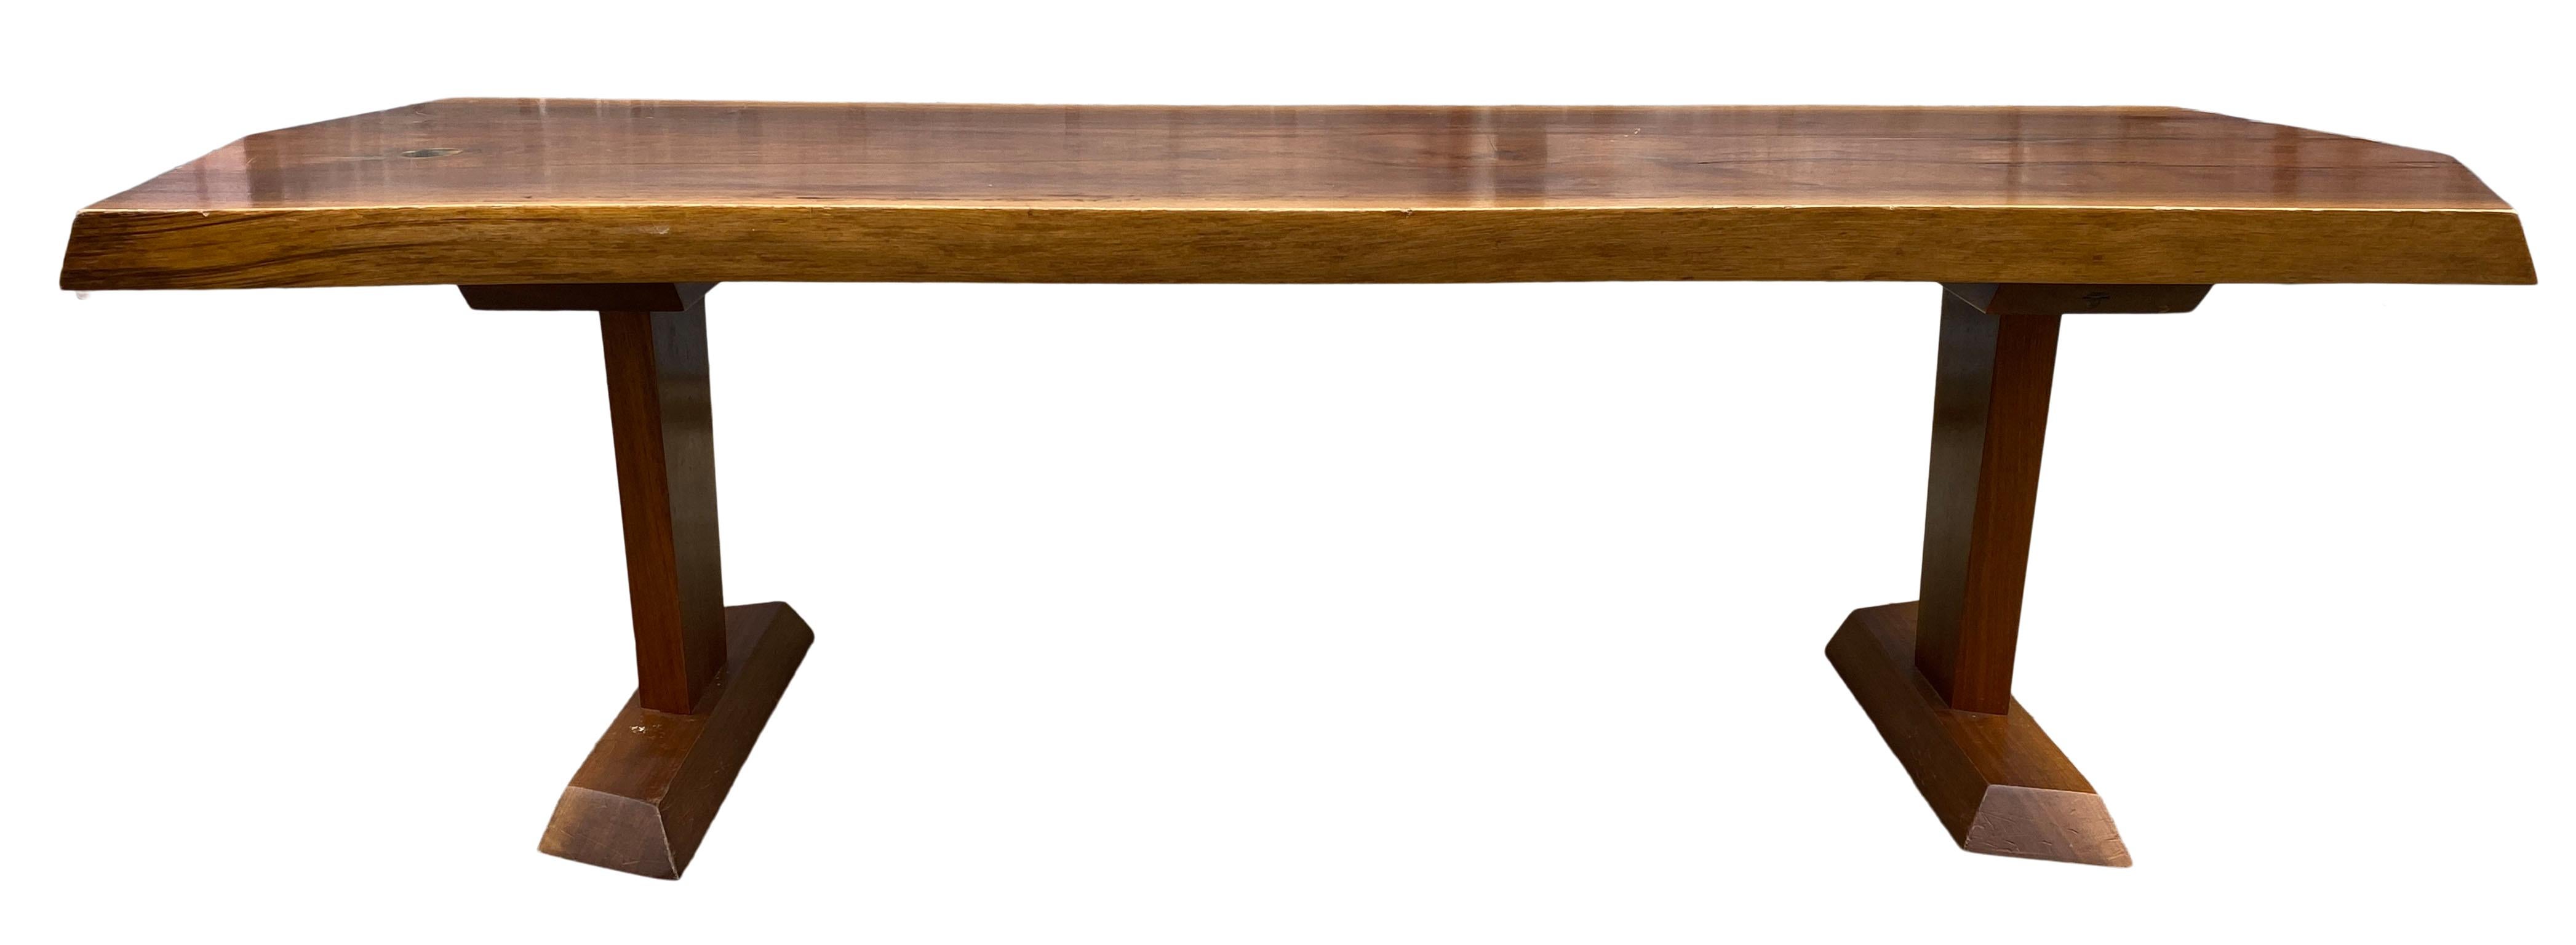 Beautiful 1960s in style of George Nakashima solid walnut 4' long bench or coffee table. beautiful walnut slab, Minimalist design. Very delicate designed Bench Japanese modern style midcentury American Studio craft. All solid walnut. Very minimalist